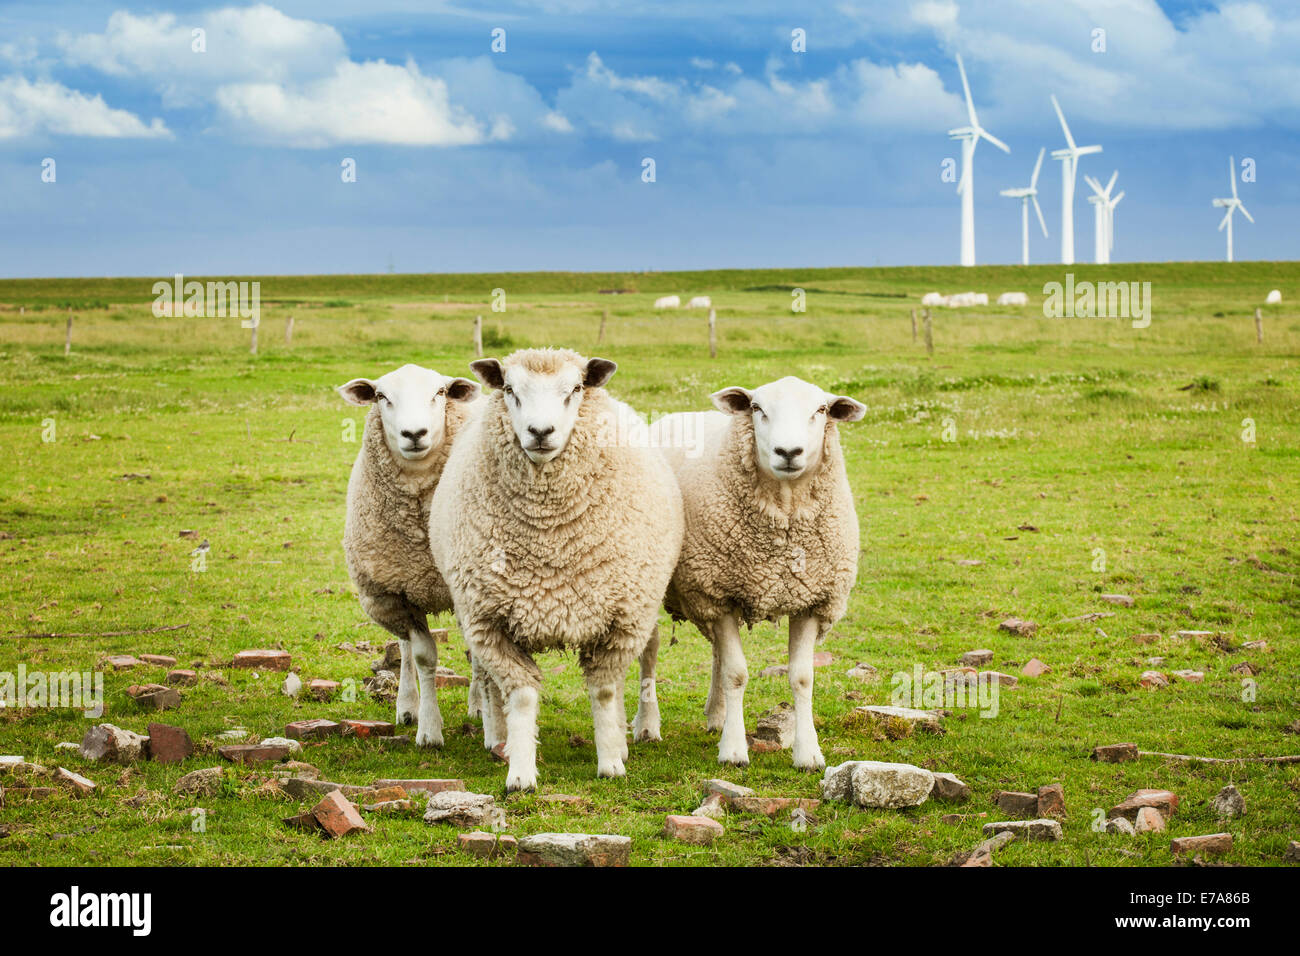 Three sheep on pasture with wind farm in background in Schleswig-Holstein, Germany Stock Photo